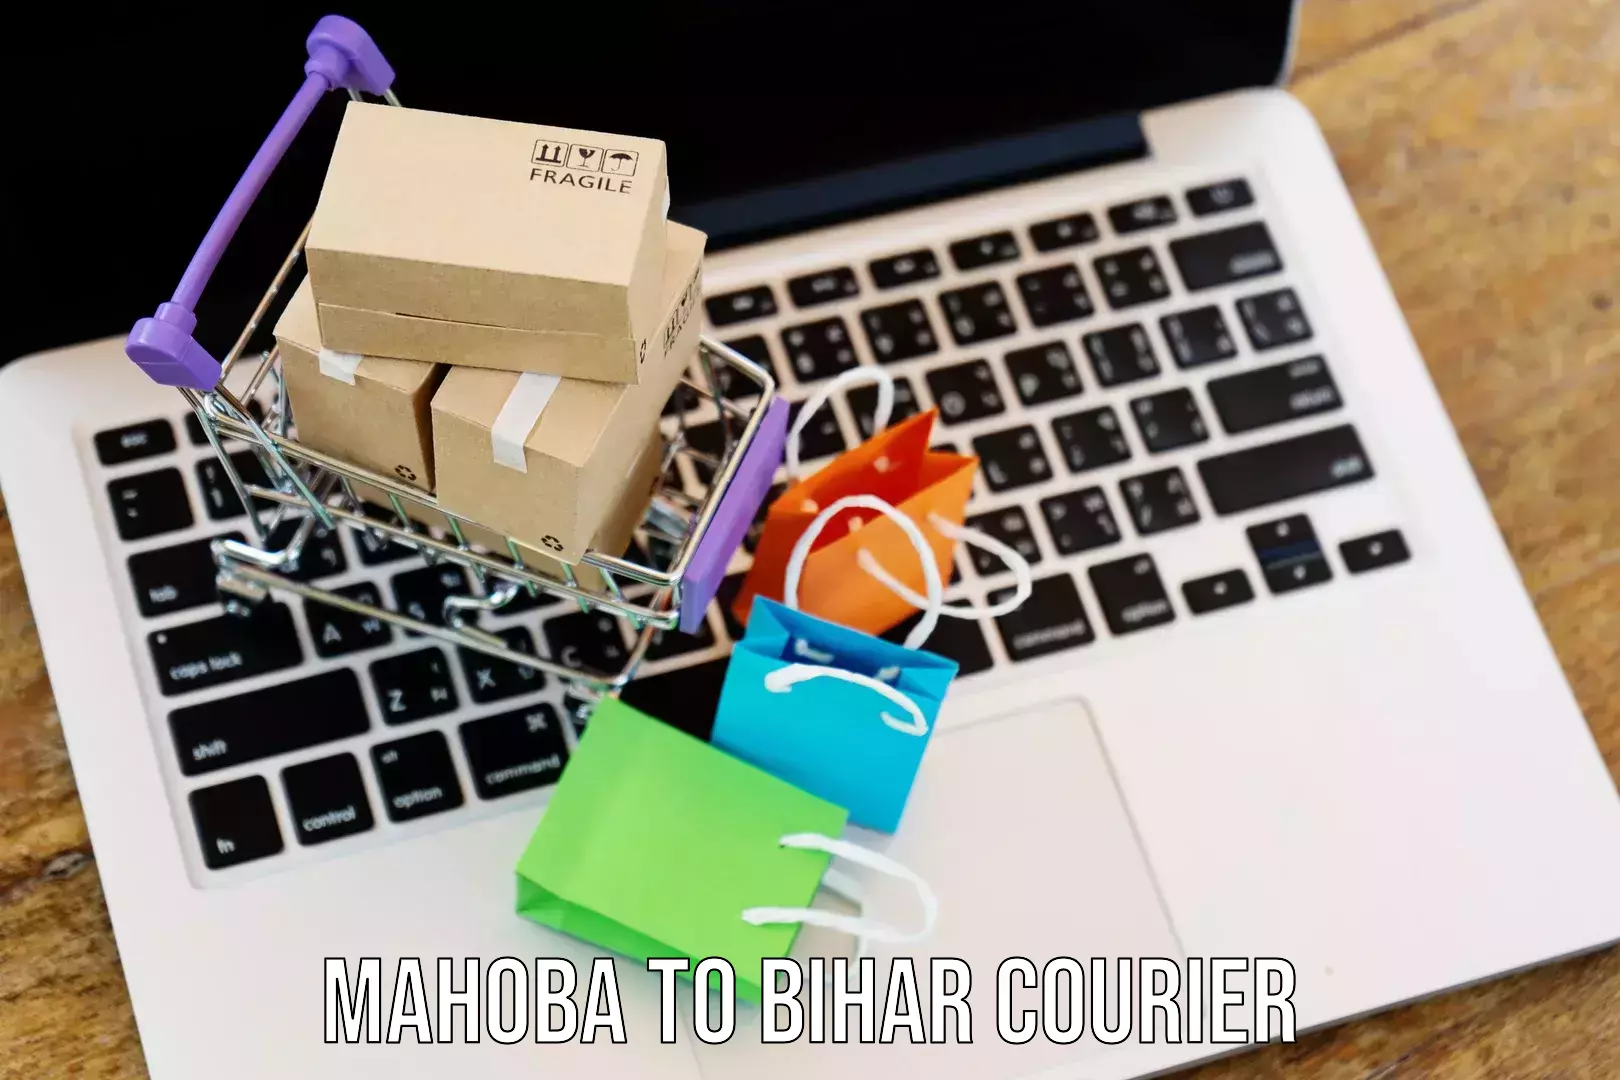 On-call courier service Mahoba to Bihar